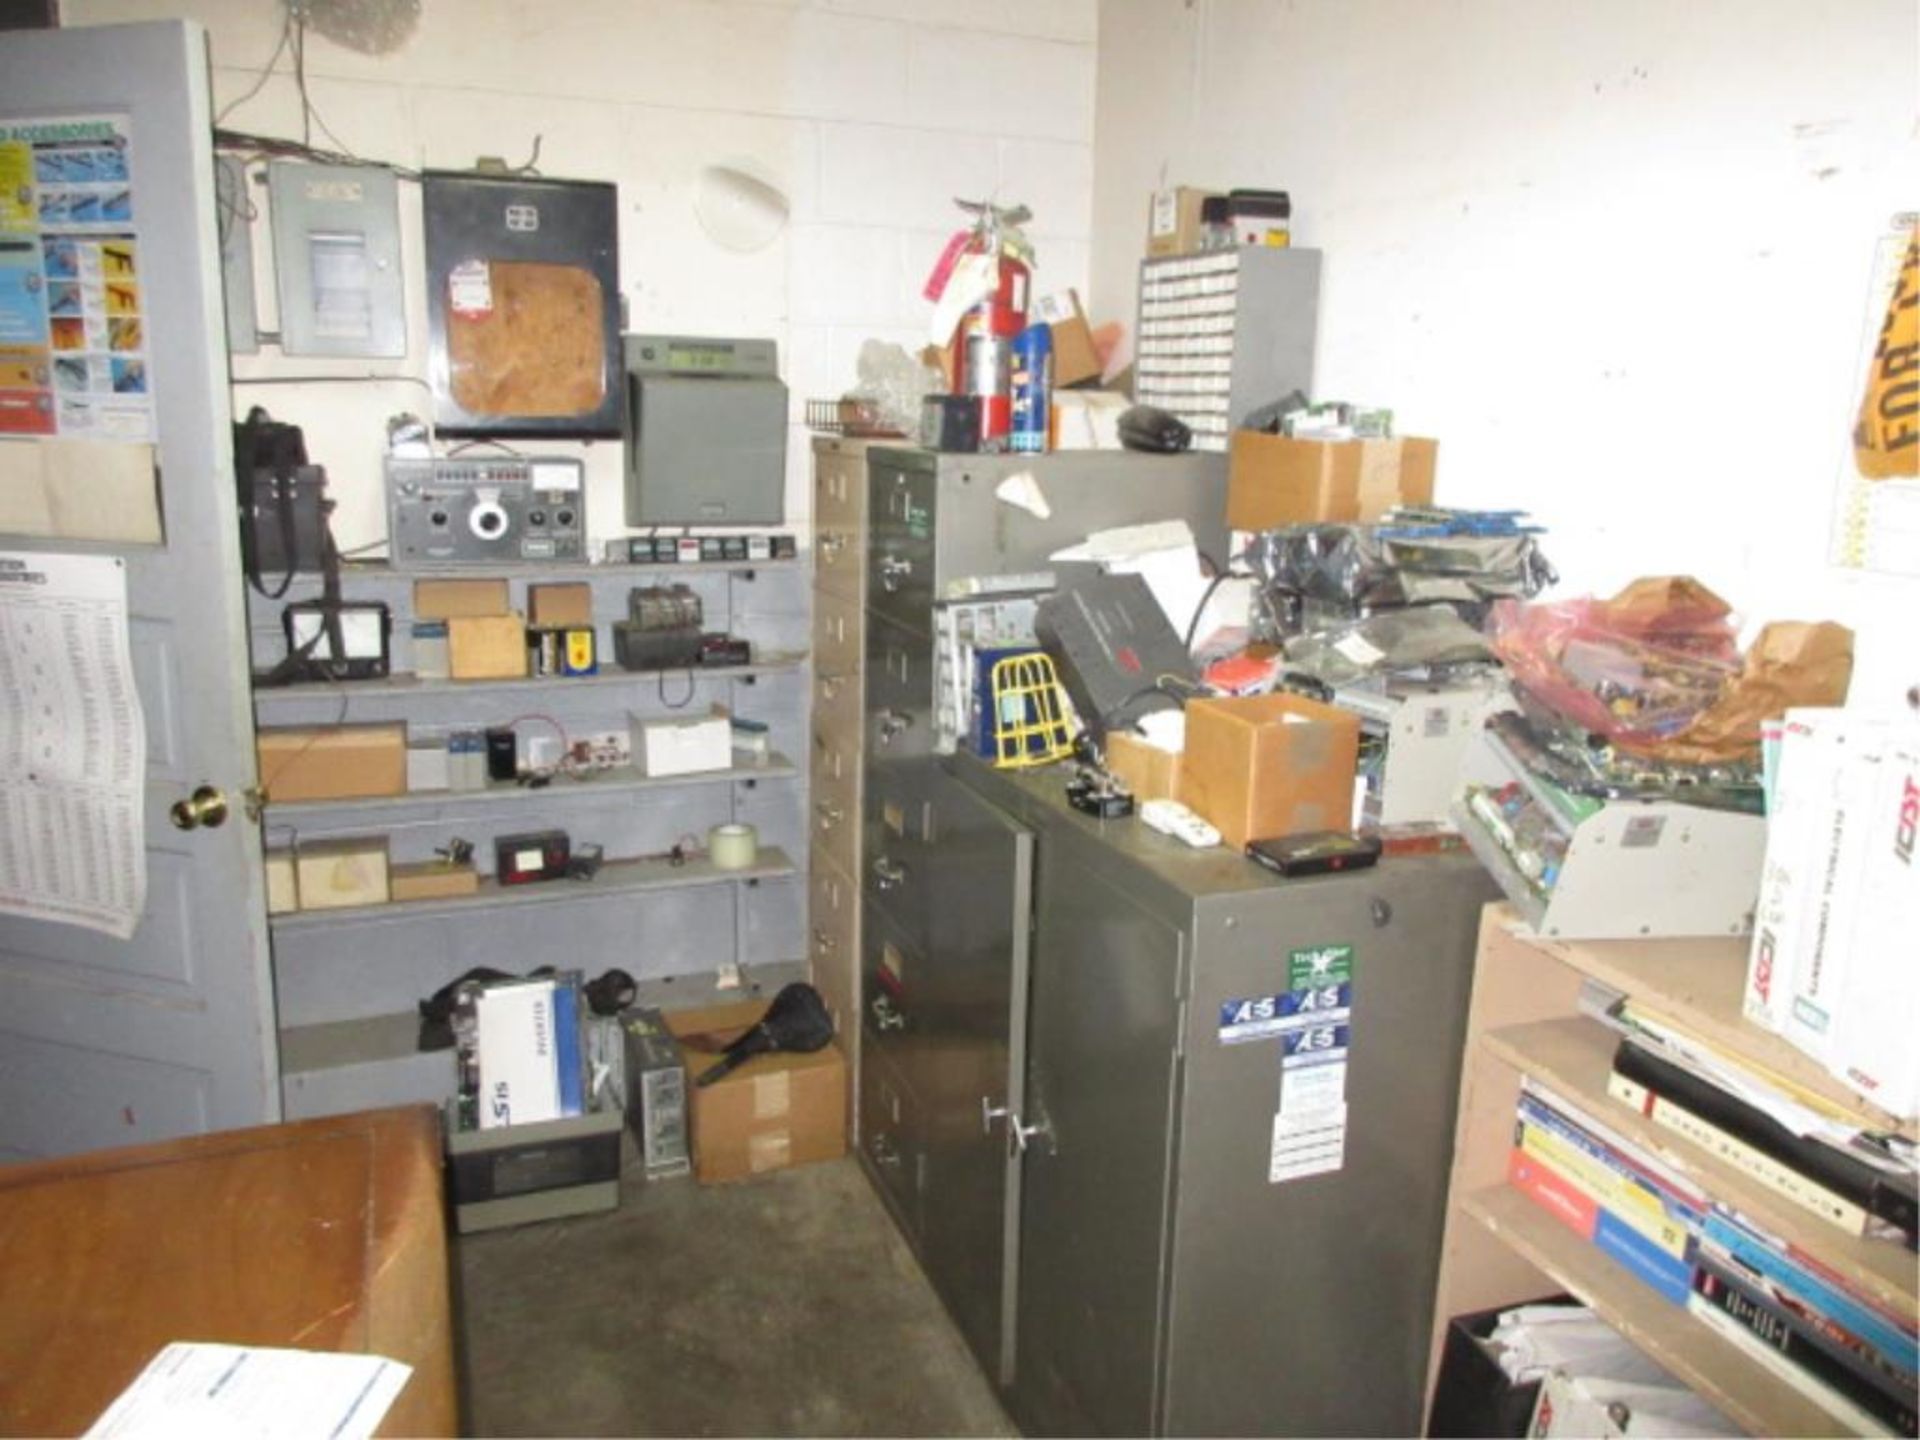 Lot Contents of Electrical Shop, includes cabinets, contents, conduit, etc. in three rooms. - Image 16 of 17